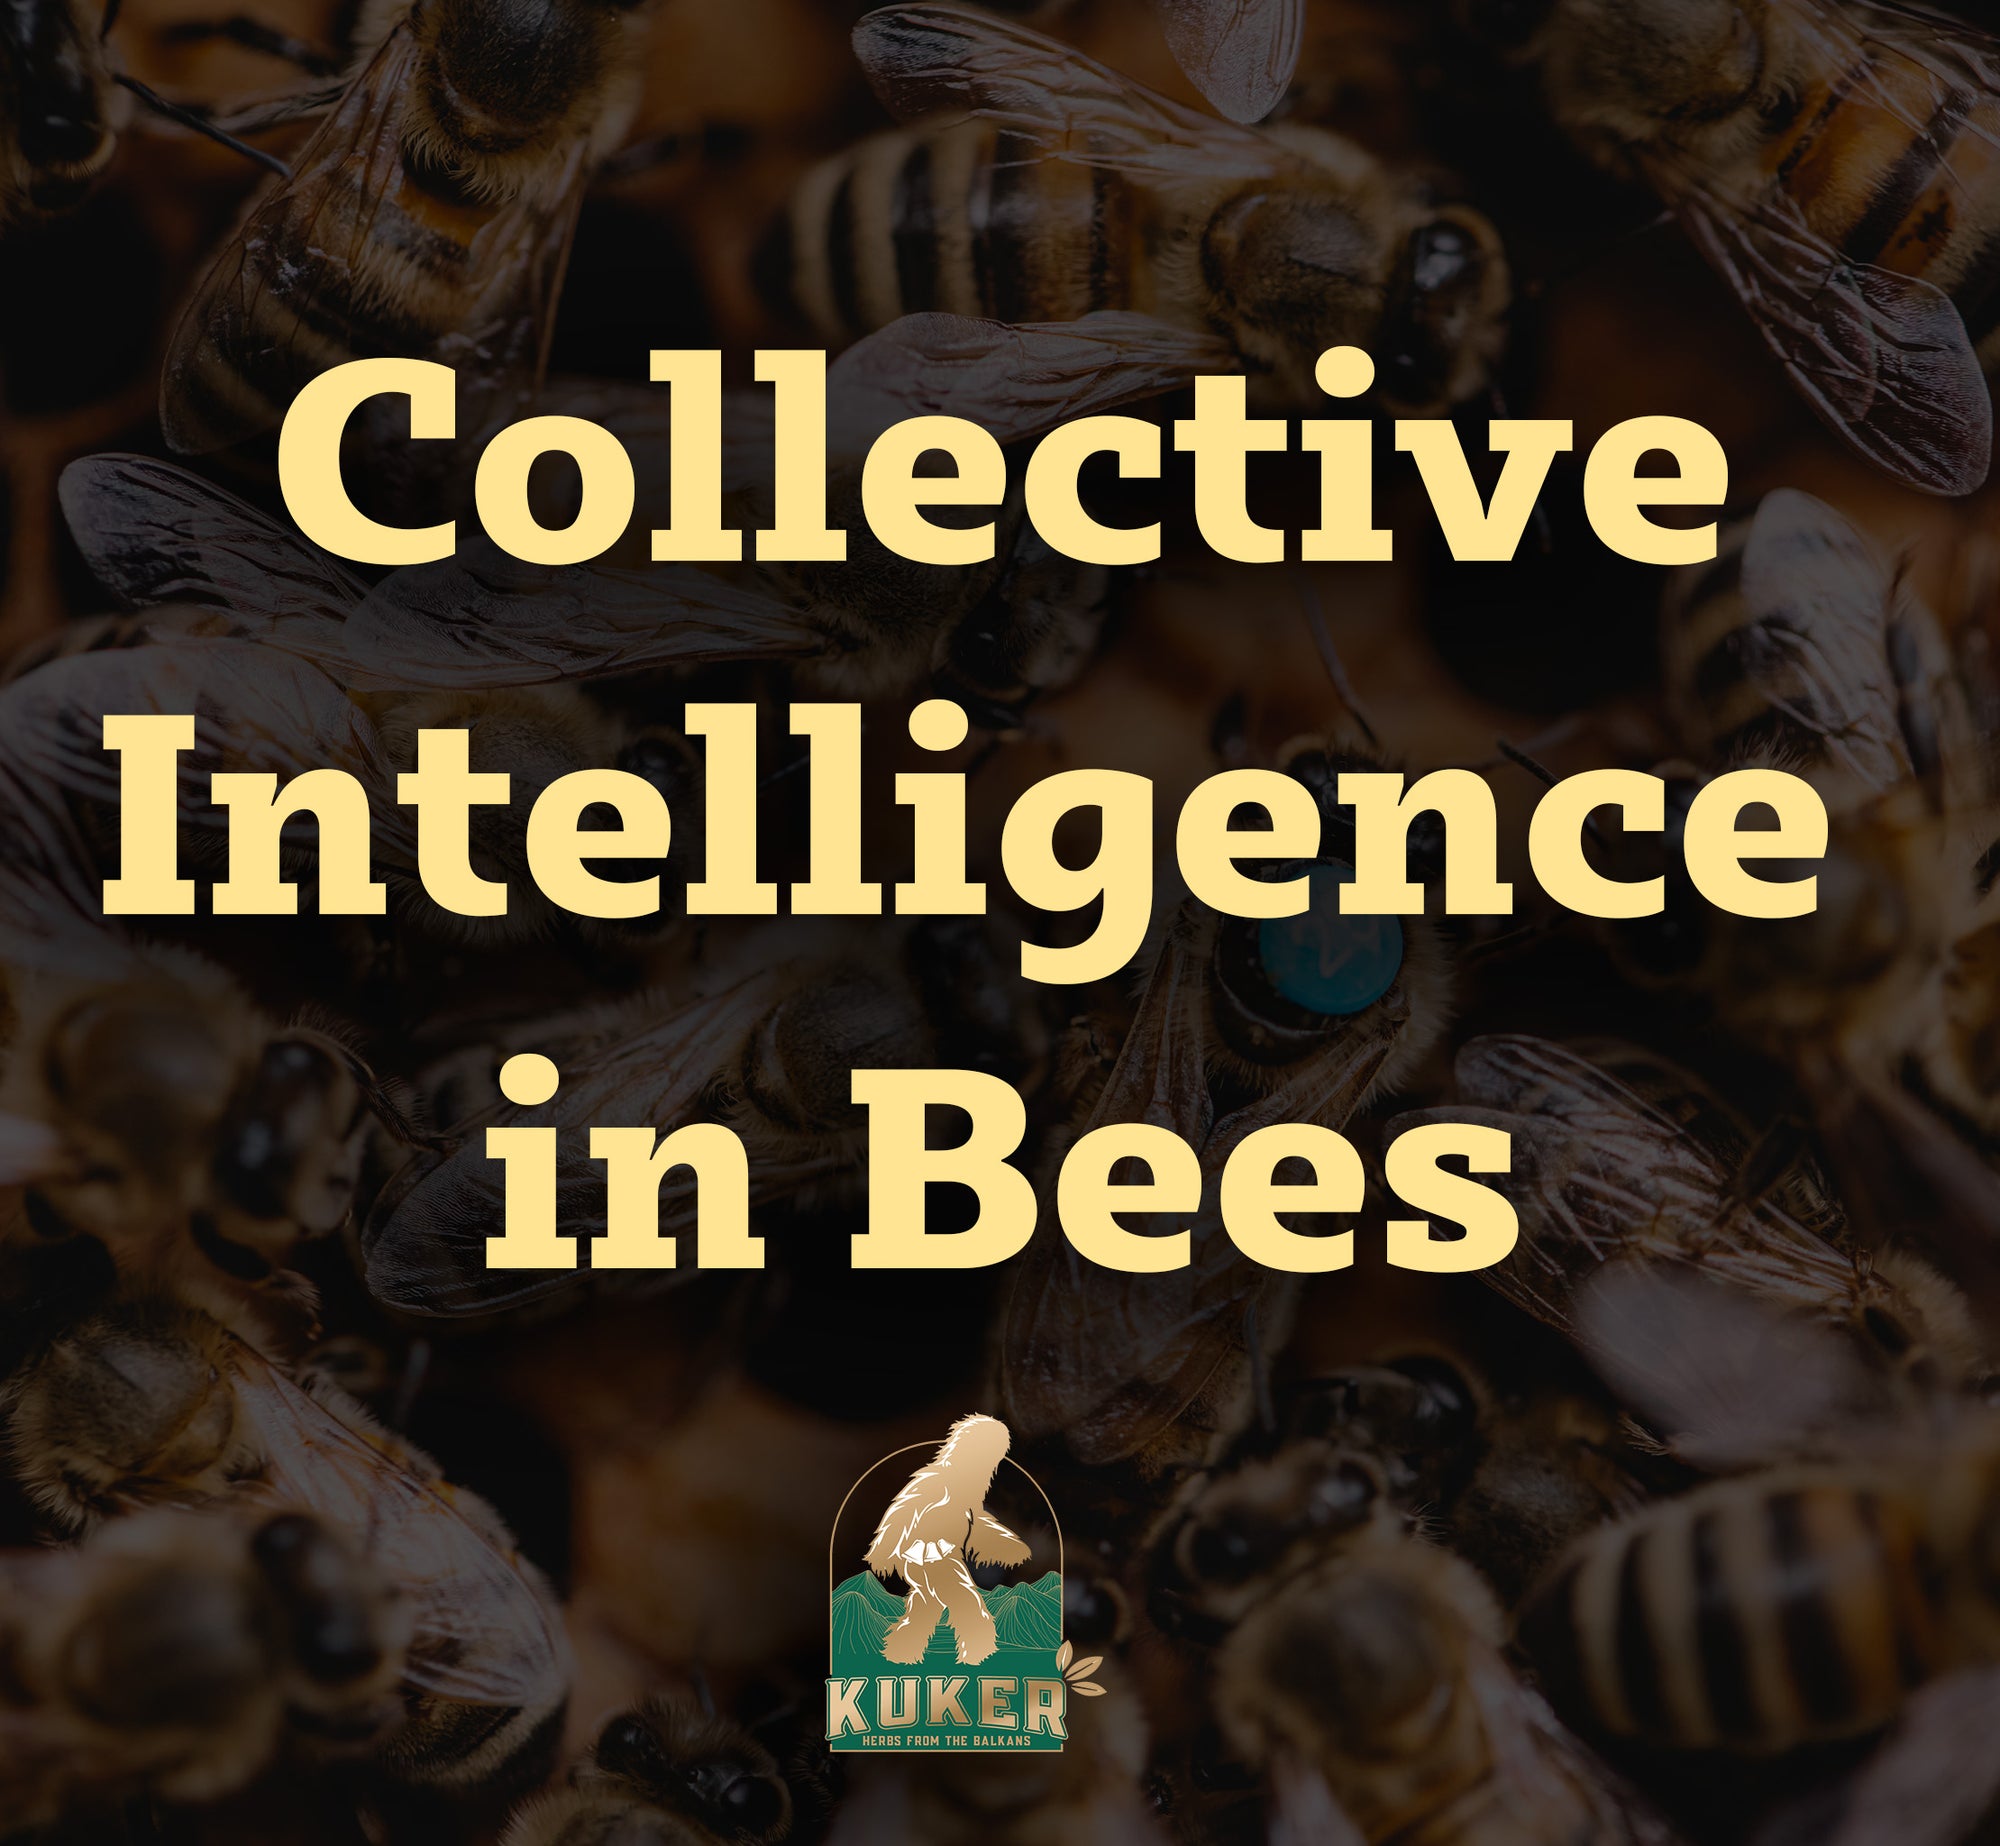 The Collective Intelligence of Bees